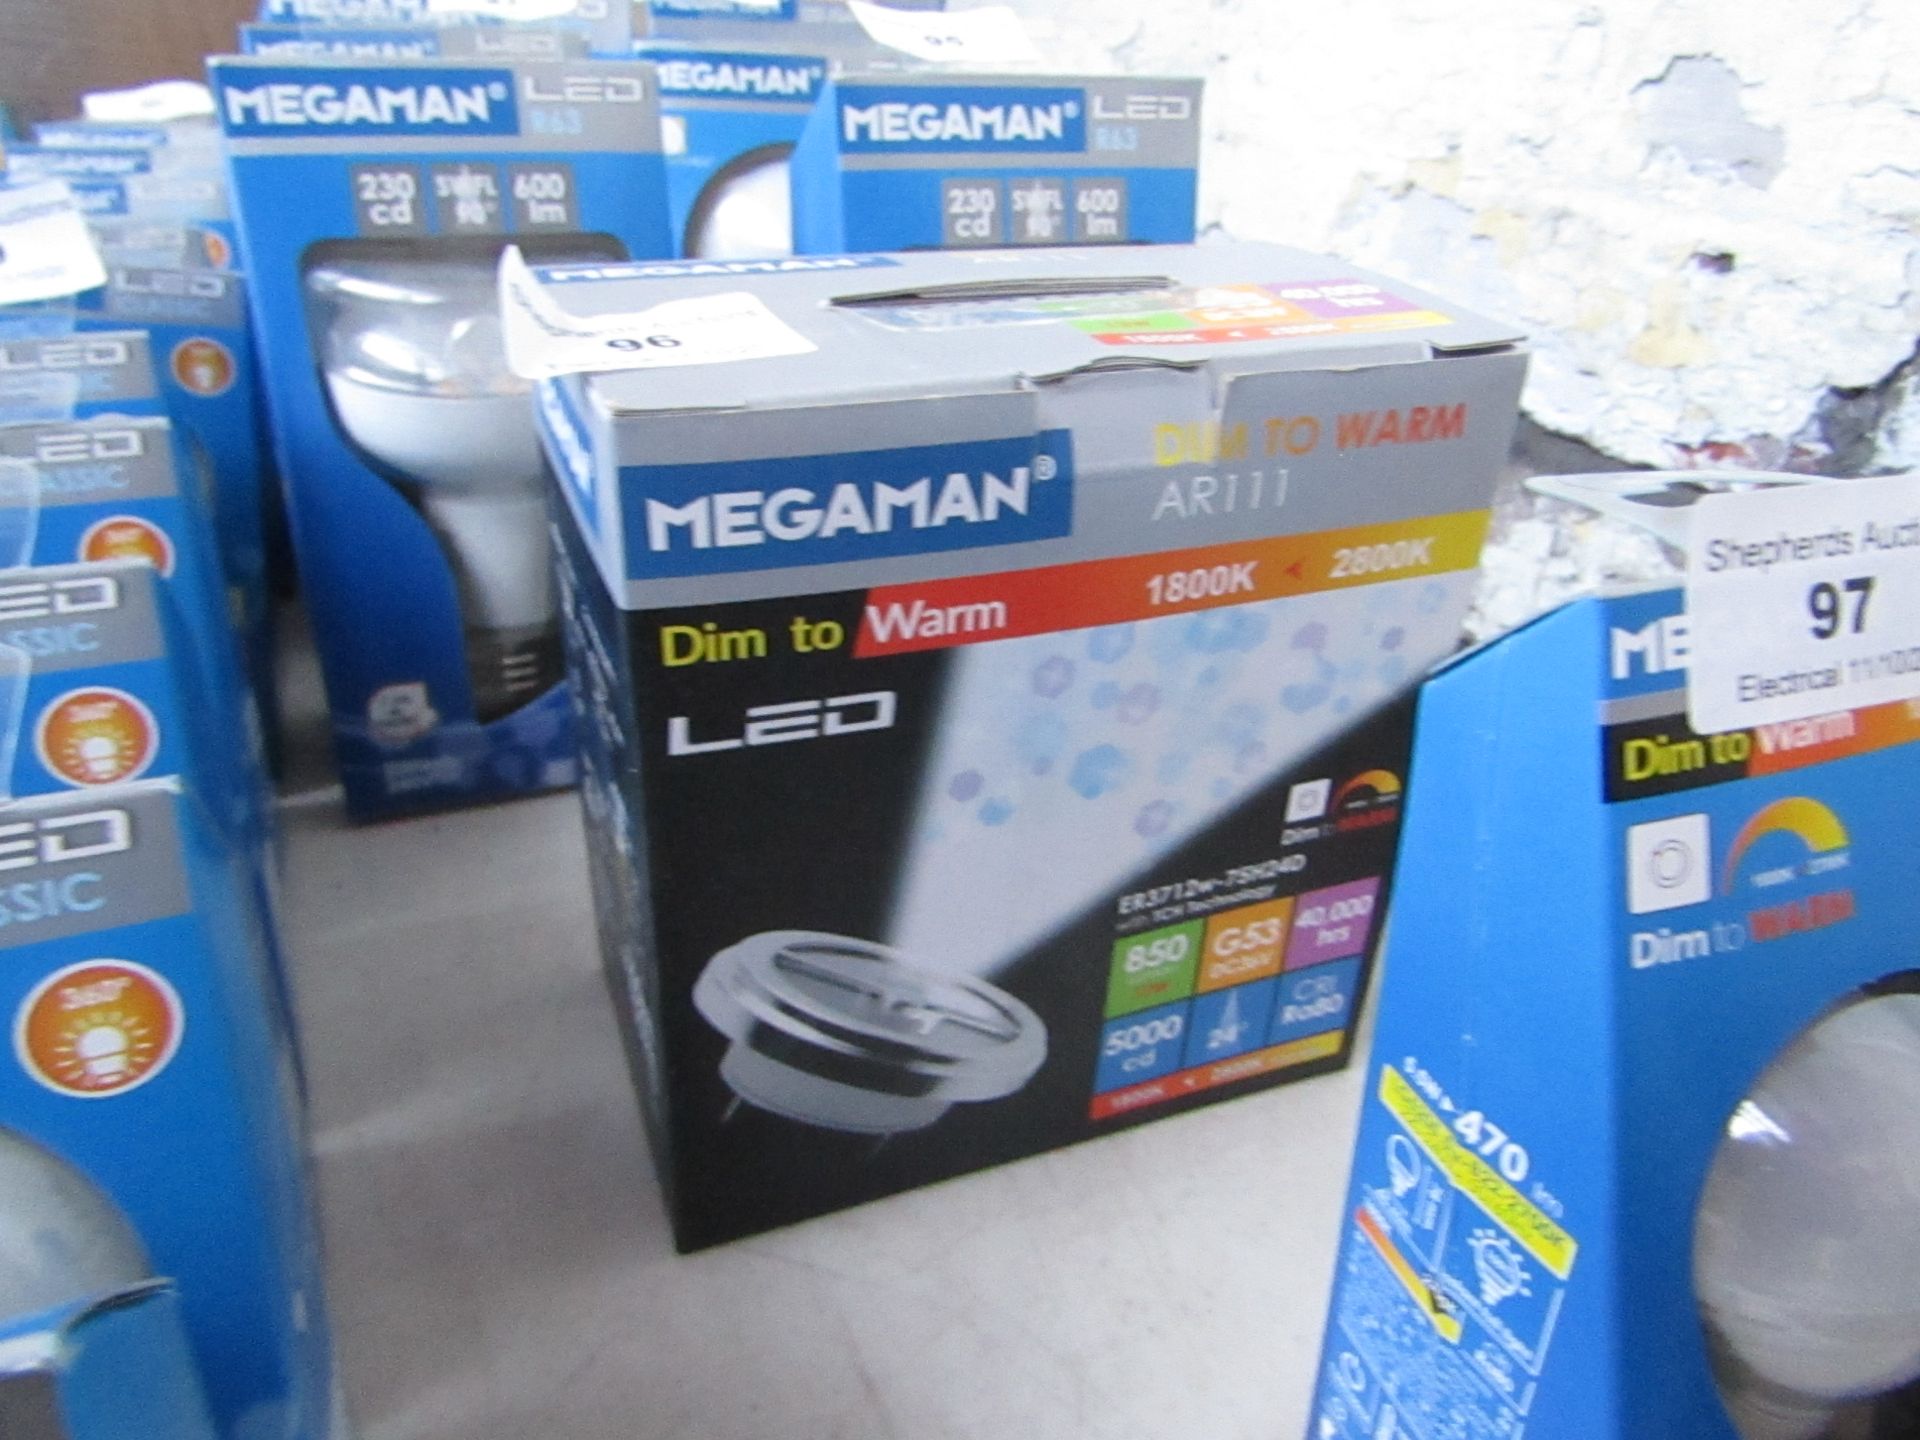 1x Megaman Dim to Warm AR111 LED Bulb, New and Boxed. 40,000 Hrs / G53 / 850 Lumens